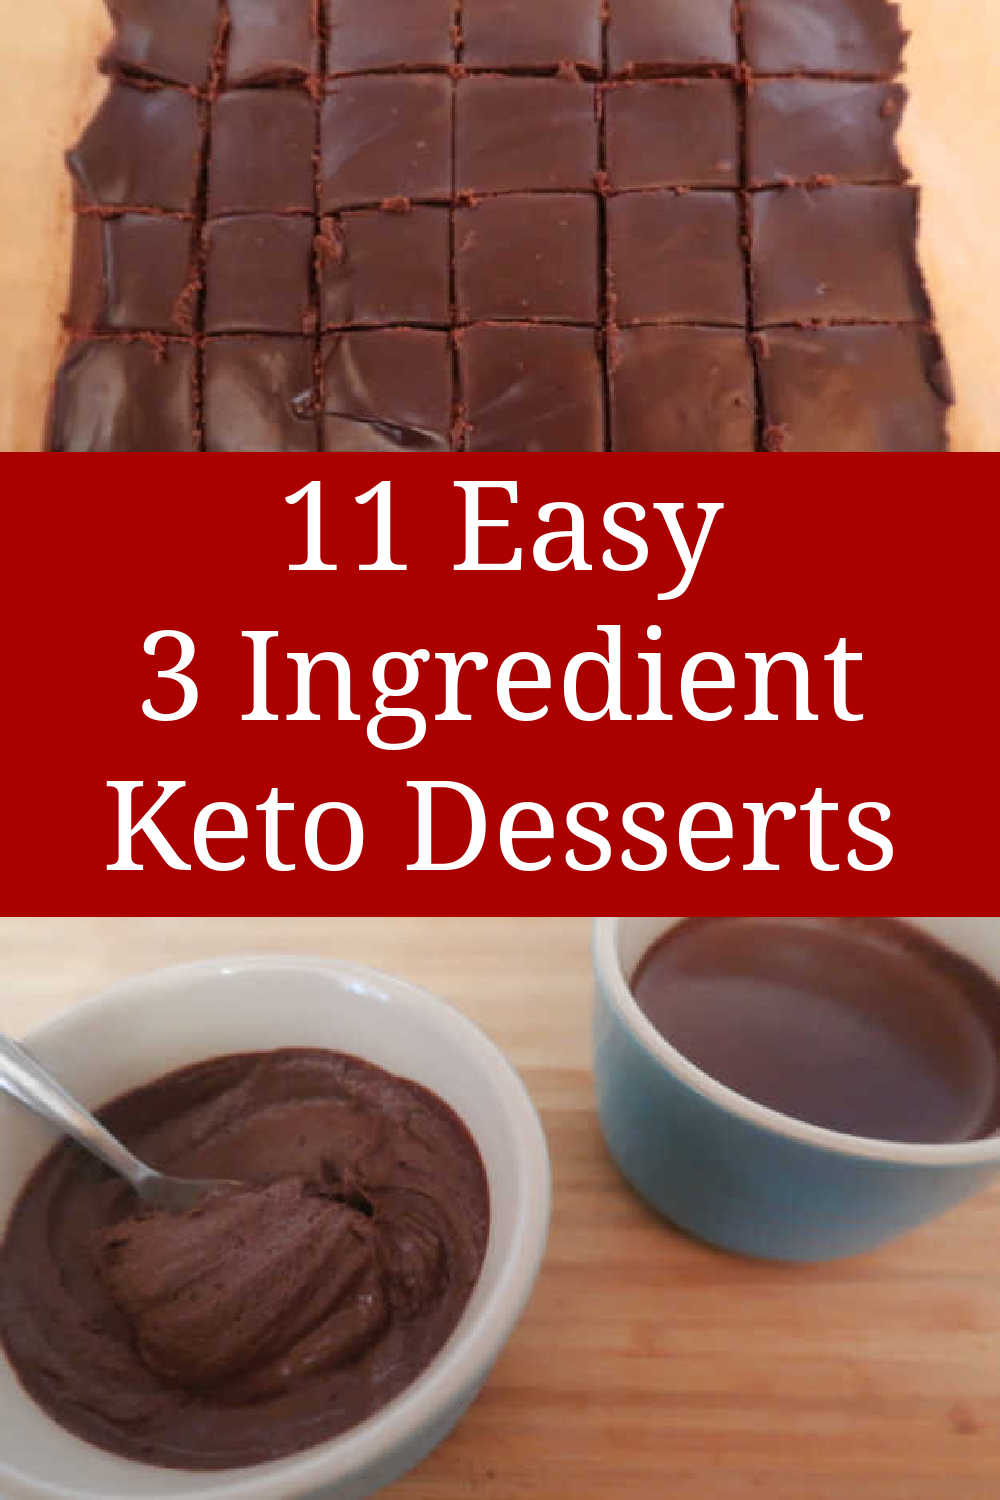 3 Ingredient Keto Desserts - 11 Easy Low Carb & Sugar Free Pudding Ideas - including no bake mousse, peanut butter cookies & more.